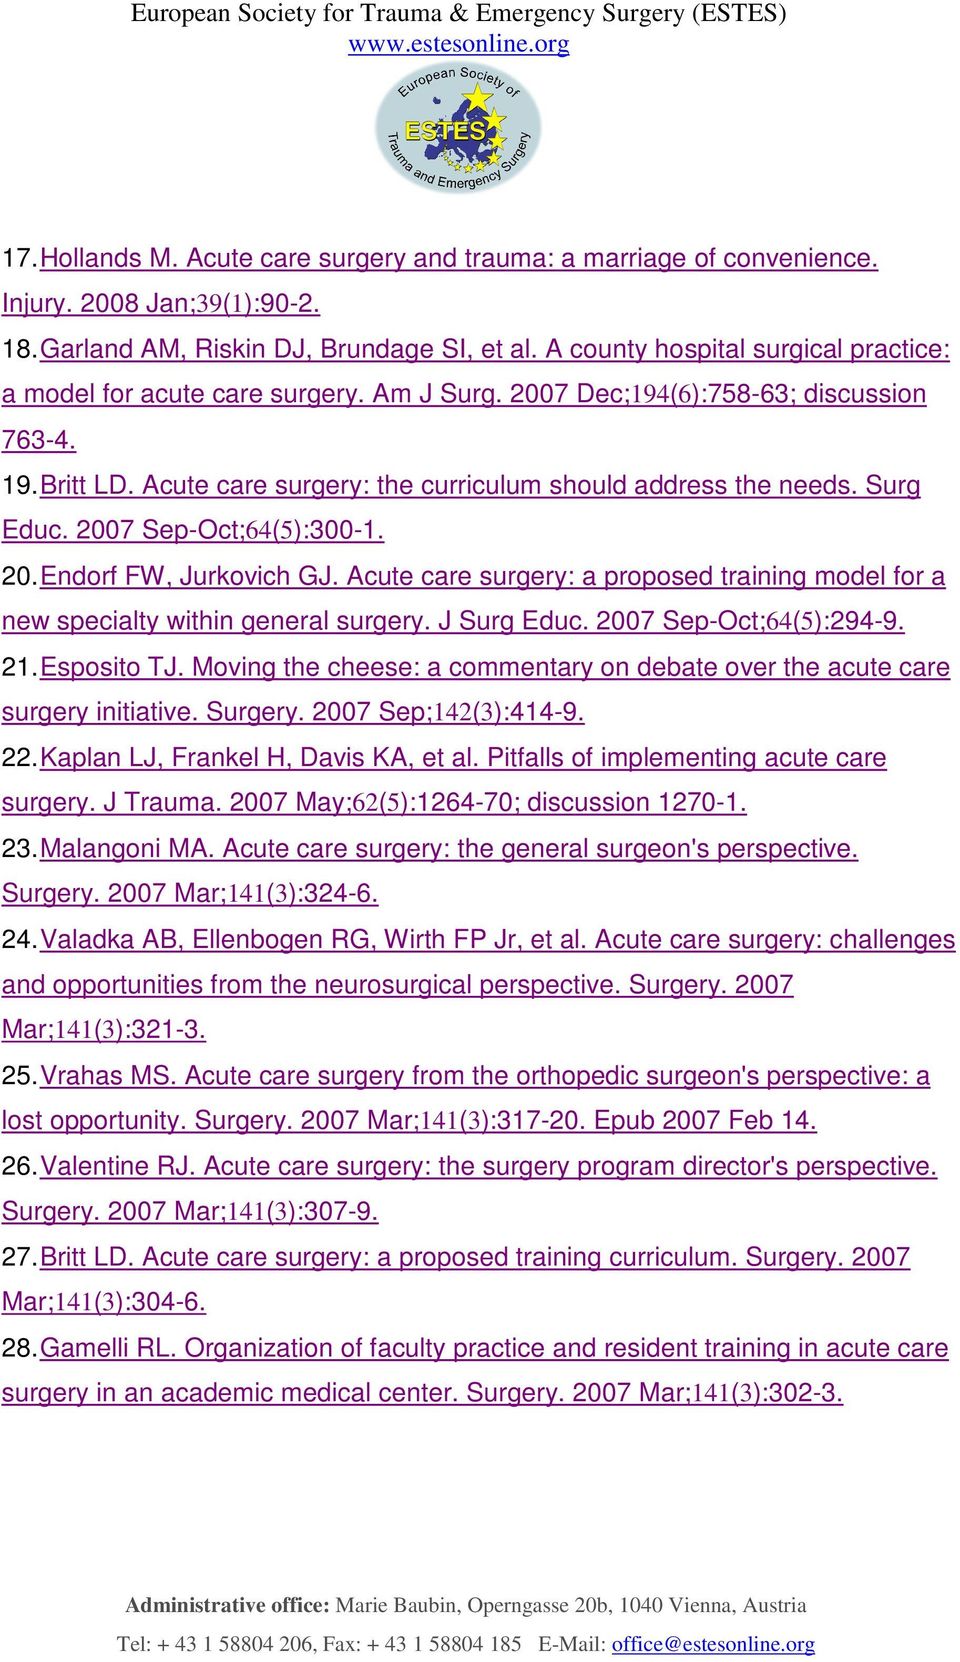 Surg Educ. 2007 Sep-Oct;64(5):300-1. 20. Endorf FW, Jurkovich GJ. Acute care surgery: a proposed training model for a new specialty within general surgery. J Surg Educ. 2007 Sep-Oct;64(5):294-9. 21.